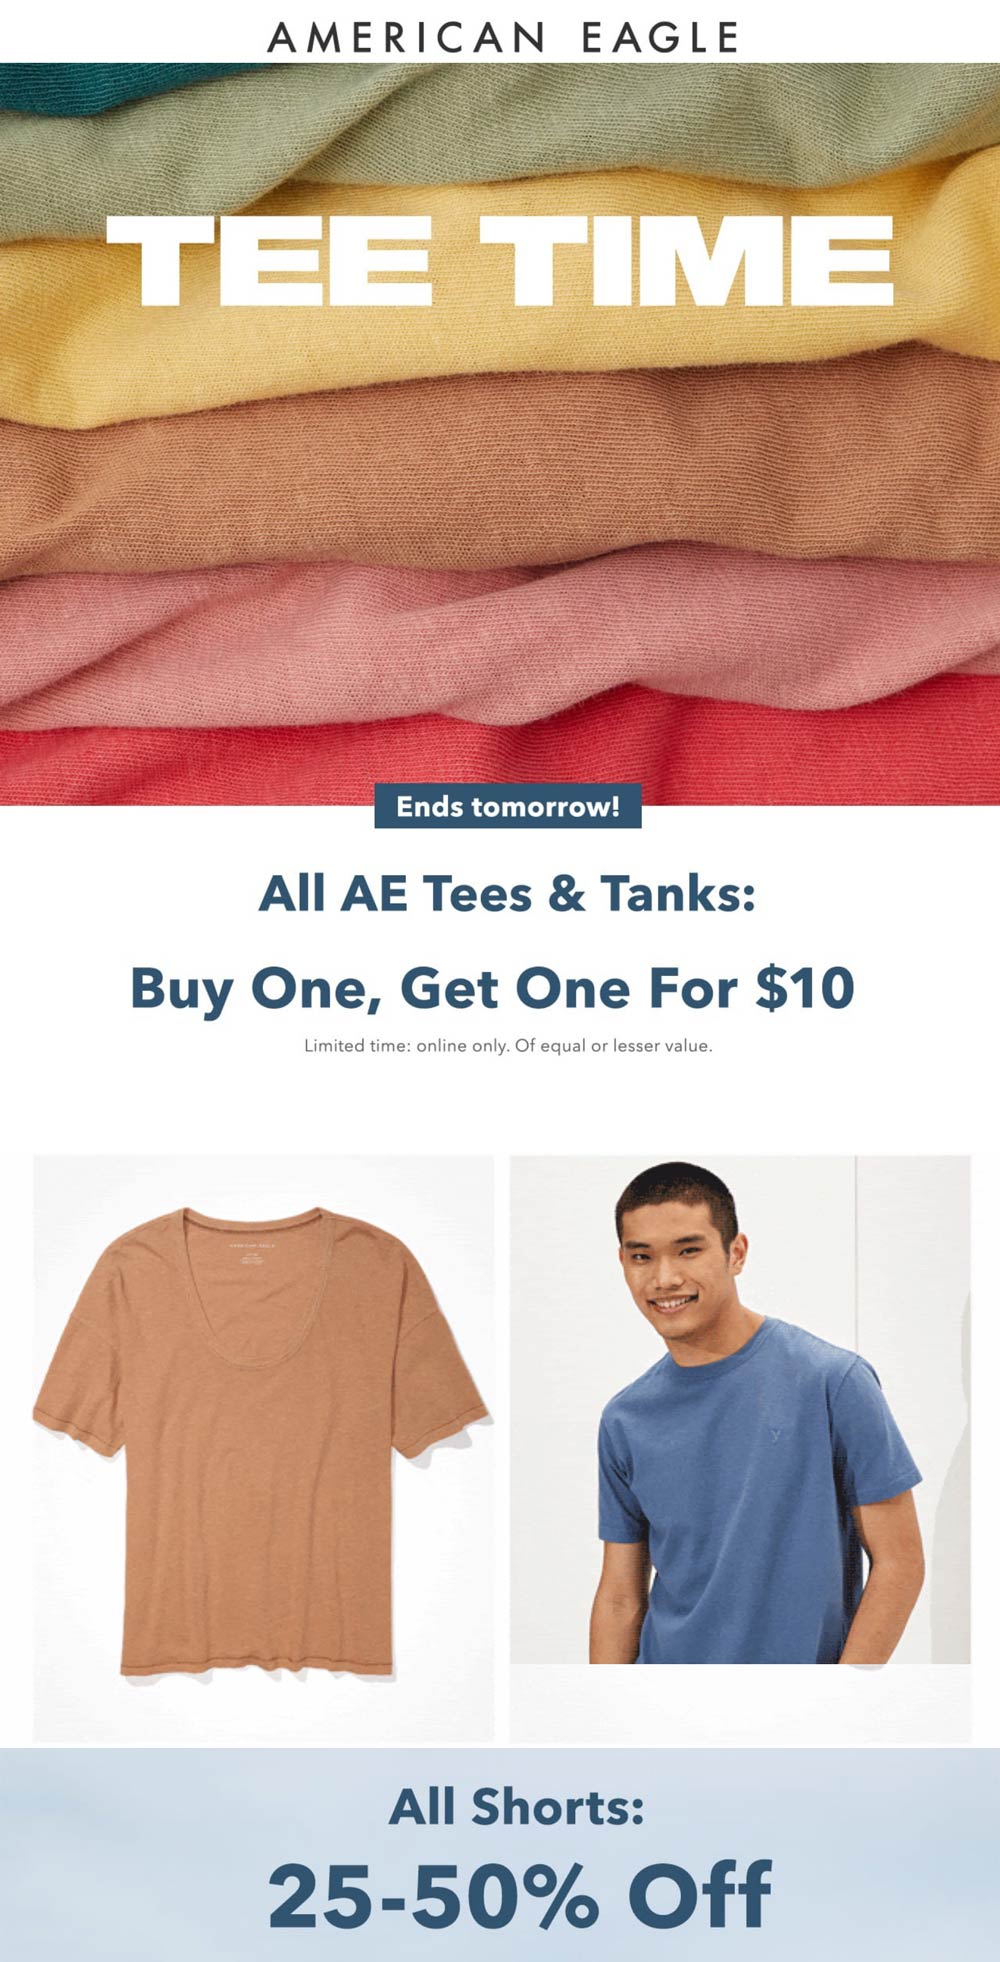 American Eagle stores Coupon  25% off all shorts & second tee or tank $10 at American Eagle #americaneagle 